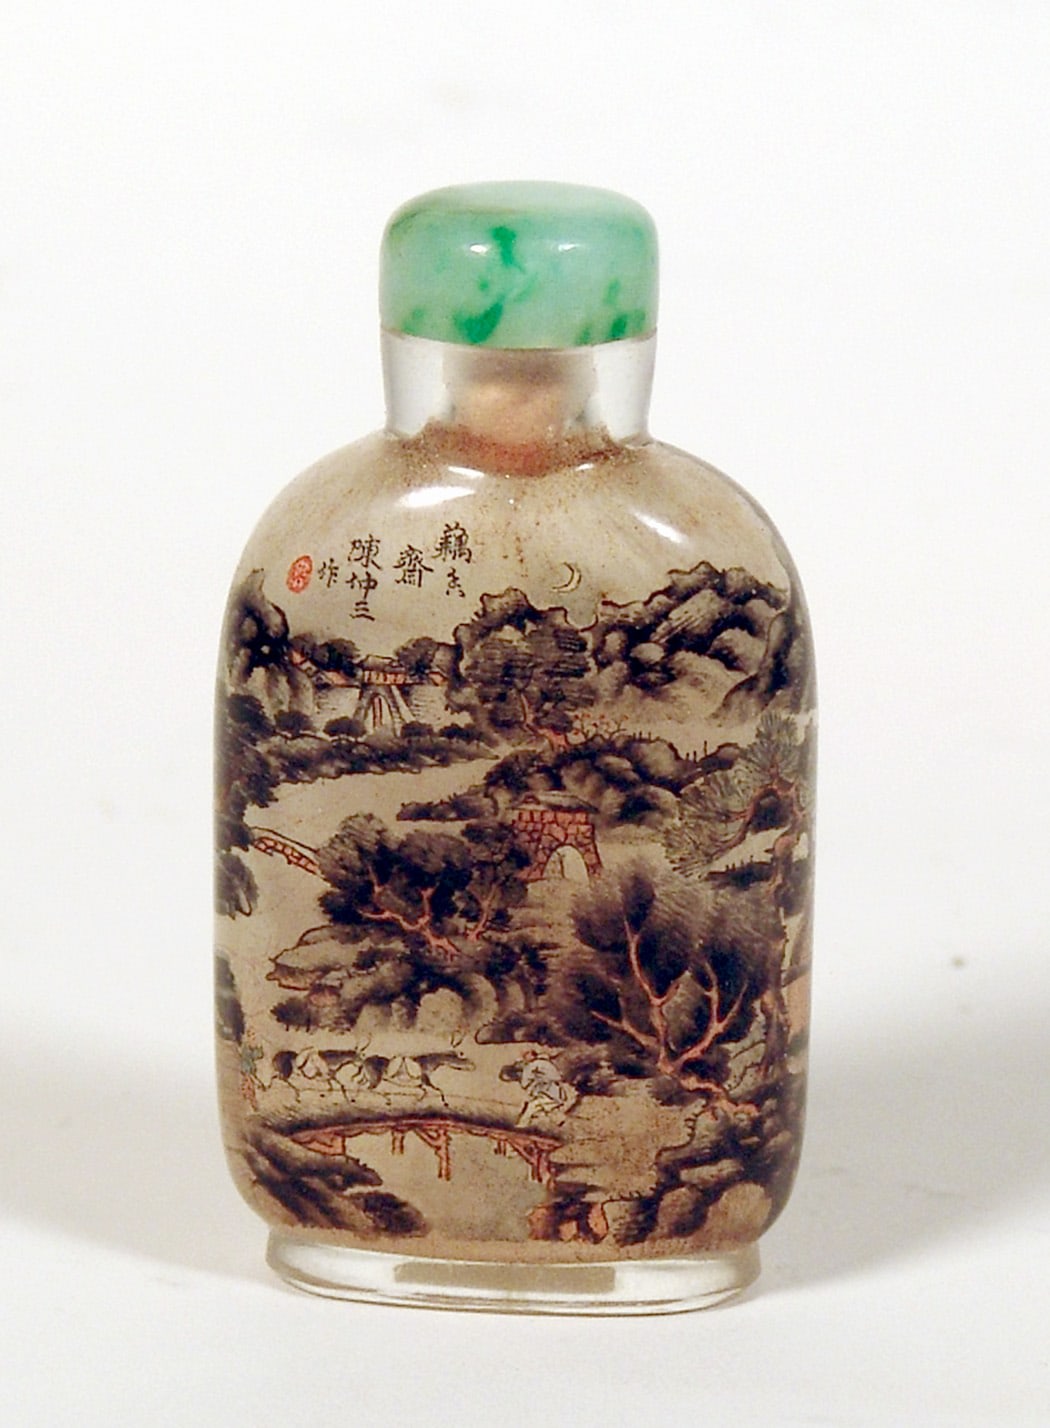 Inside Painted Glass Snuff Bottle